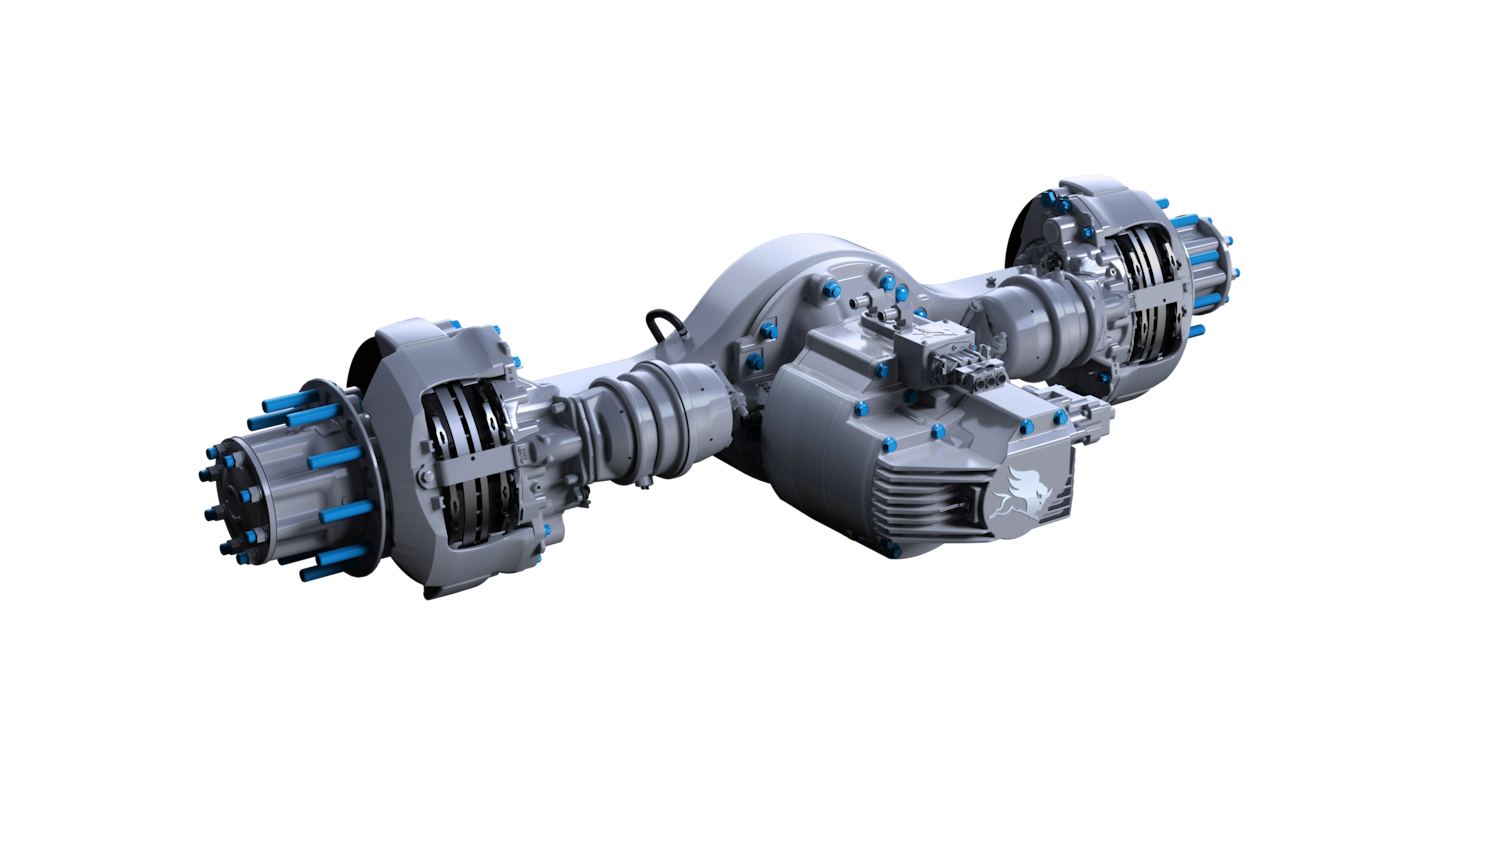 Meritor is developing three different electric powertrain platforms: the 12Xe, 14Xe, and 17Xe. The 12Xe is focused on Class 4-5 vehicles; the 14Xe (pictured here) is for Class 6-7 vehicles, or Class 8 as a tandem; the 17Xe is for Class 8 single axle applications.